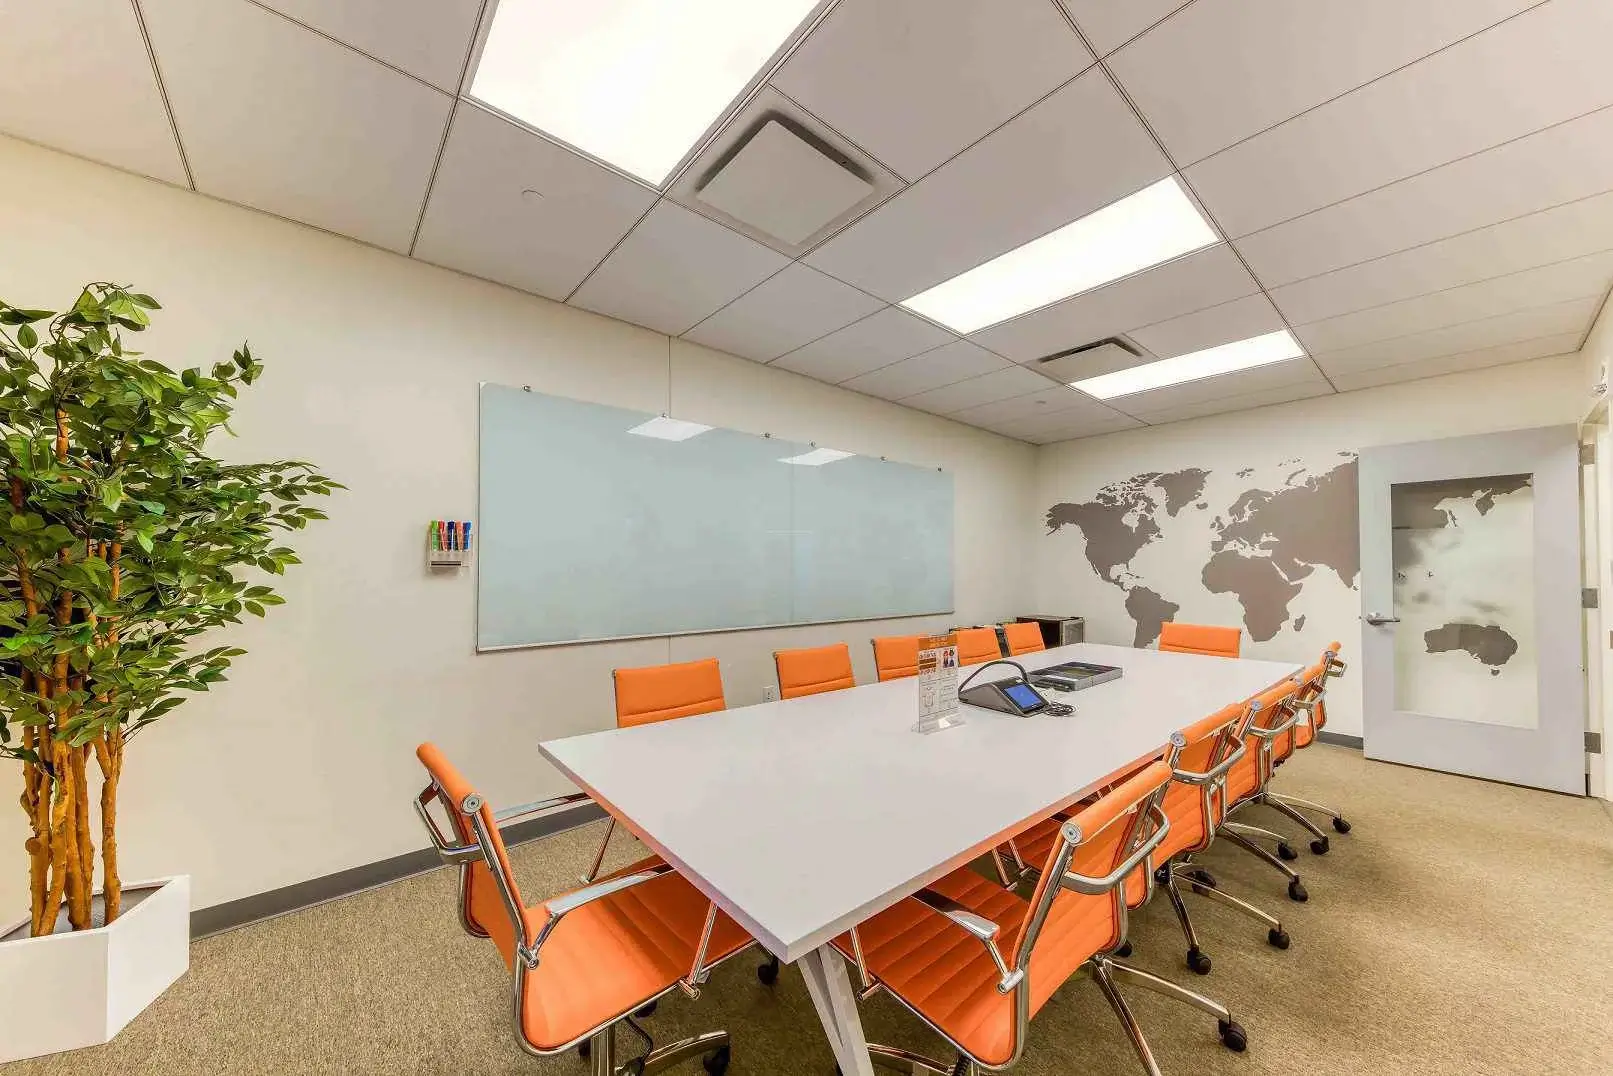 Rent Conference Room by Hour to Enhance your Business Meetings and Leave a Lasting Impression on your Clients.